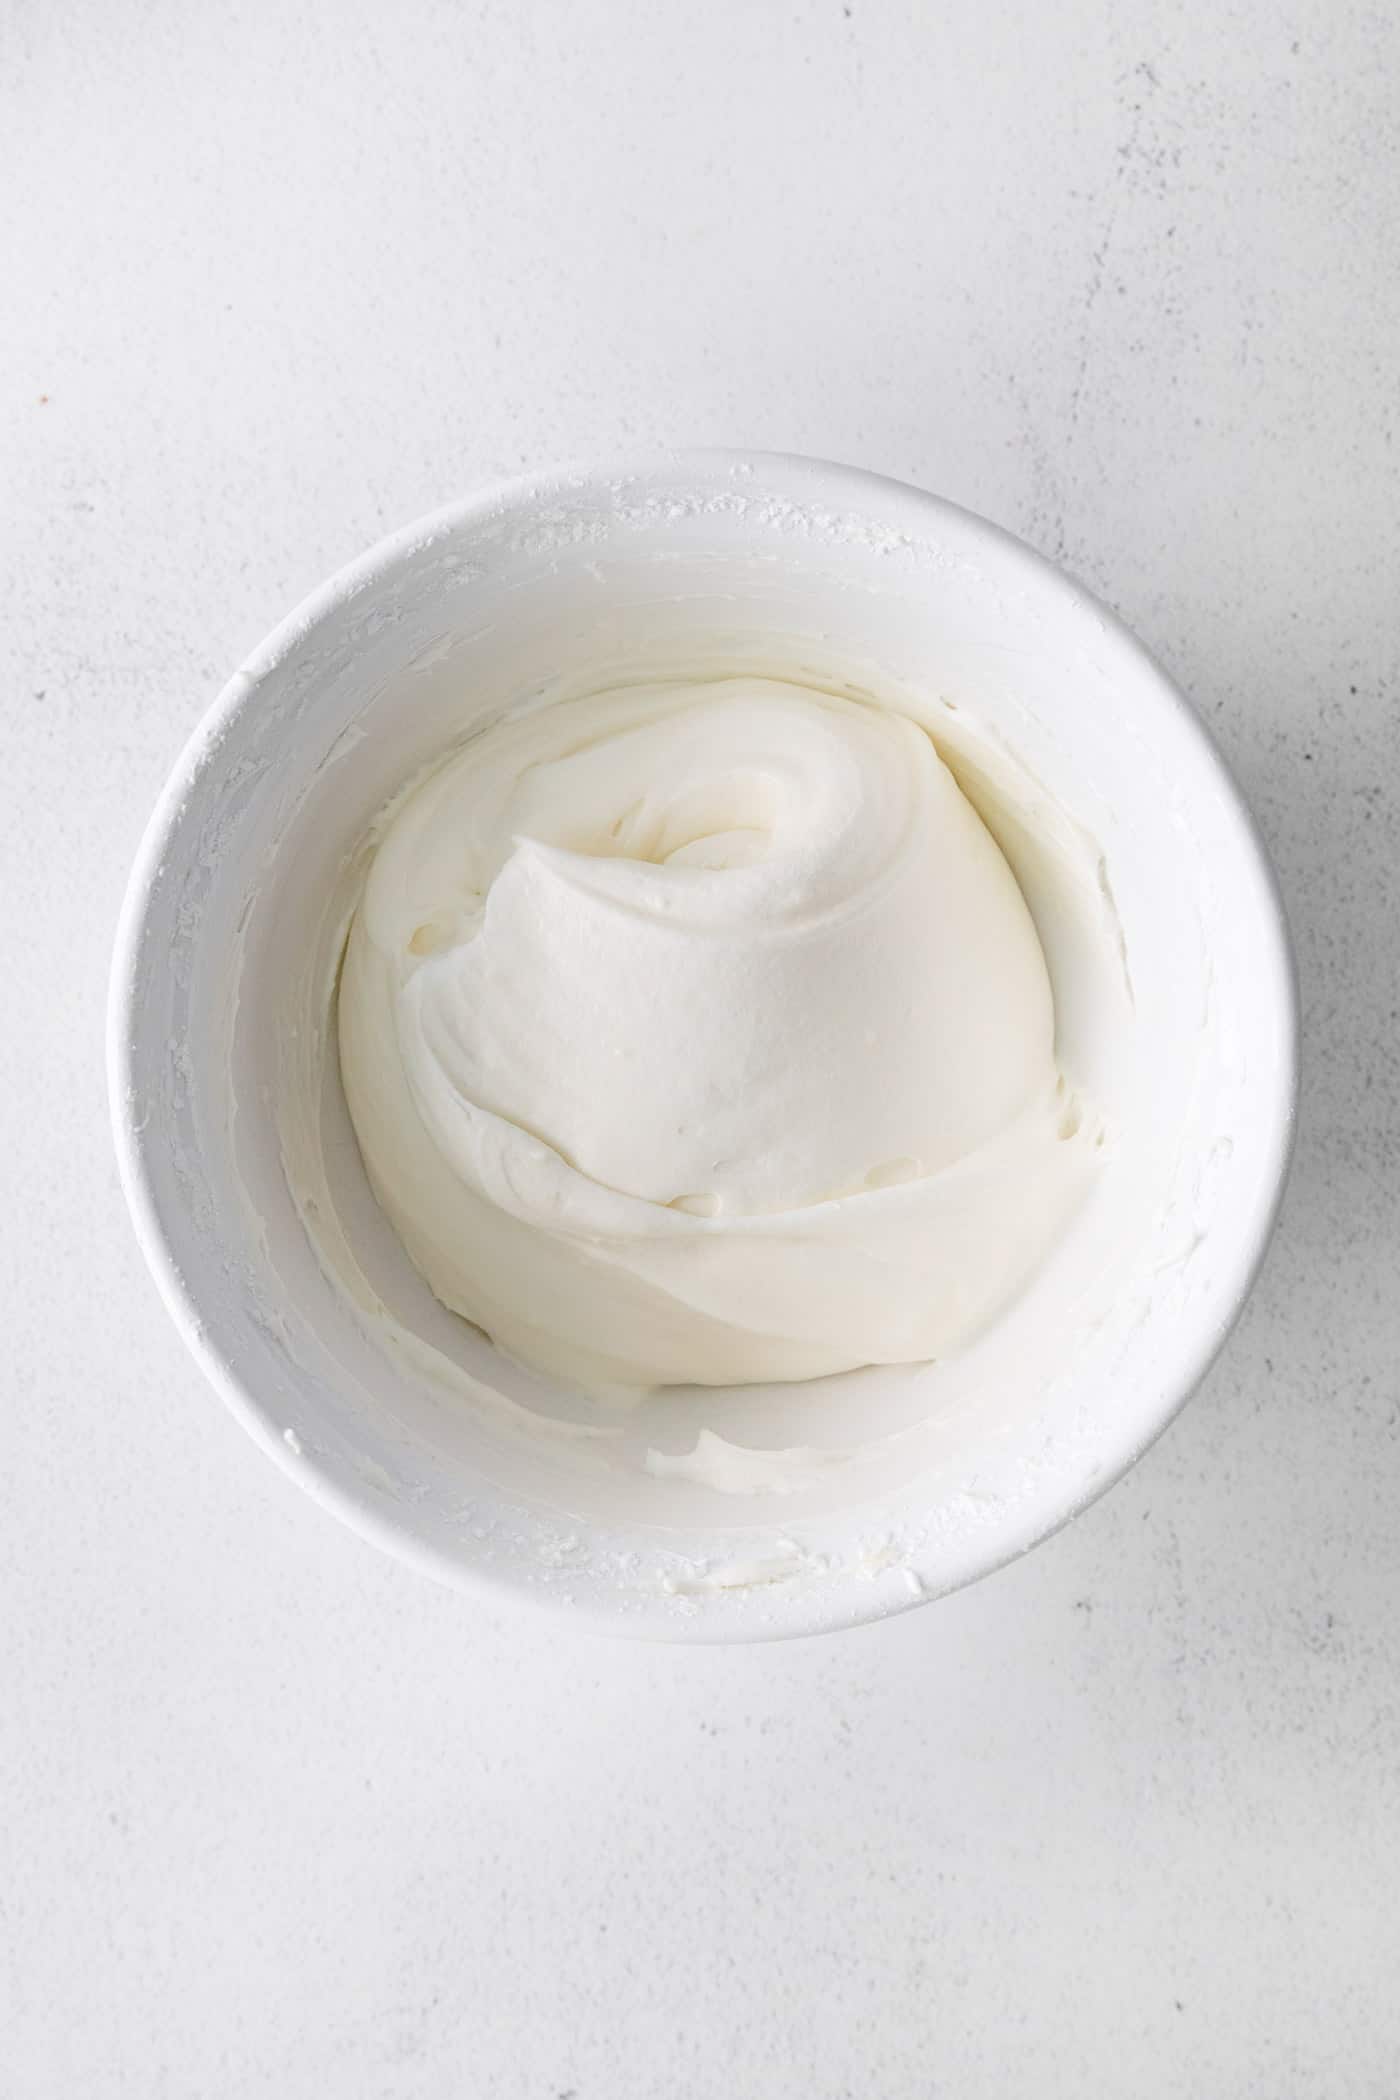 Cream cheese frosting in a white dish